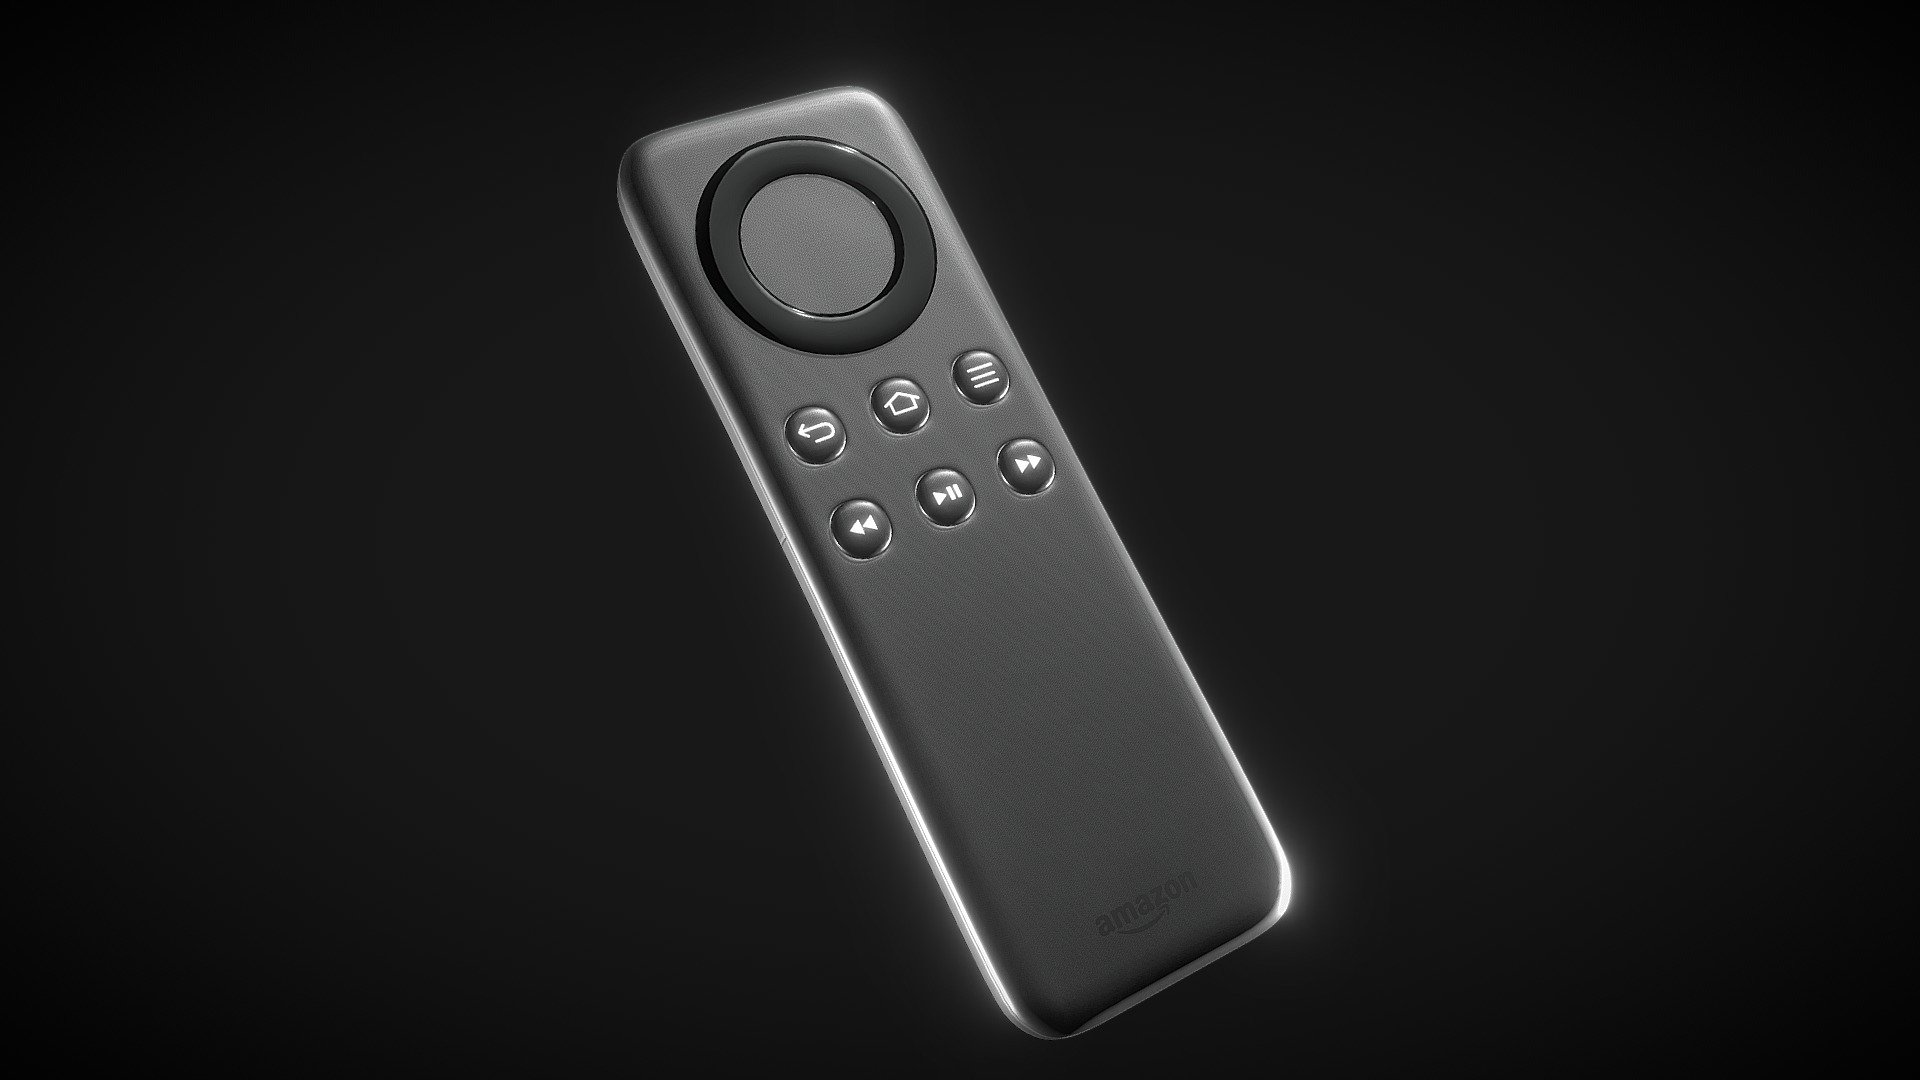 Amazon TV remote stick (CV98LM)
I liked the design of this remote so i reconstructed it
Made in blender and textured in substance painter
My patreon if you want to donate and support me (you will also get exclusive assets): https://www.patreon.com/user?u=82064625&amp;fan_landing=true&amp;view_as=public - Amazon Tv Stick - 3D model by Kenkento3D (@kenkento.zapater) 3d model